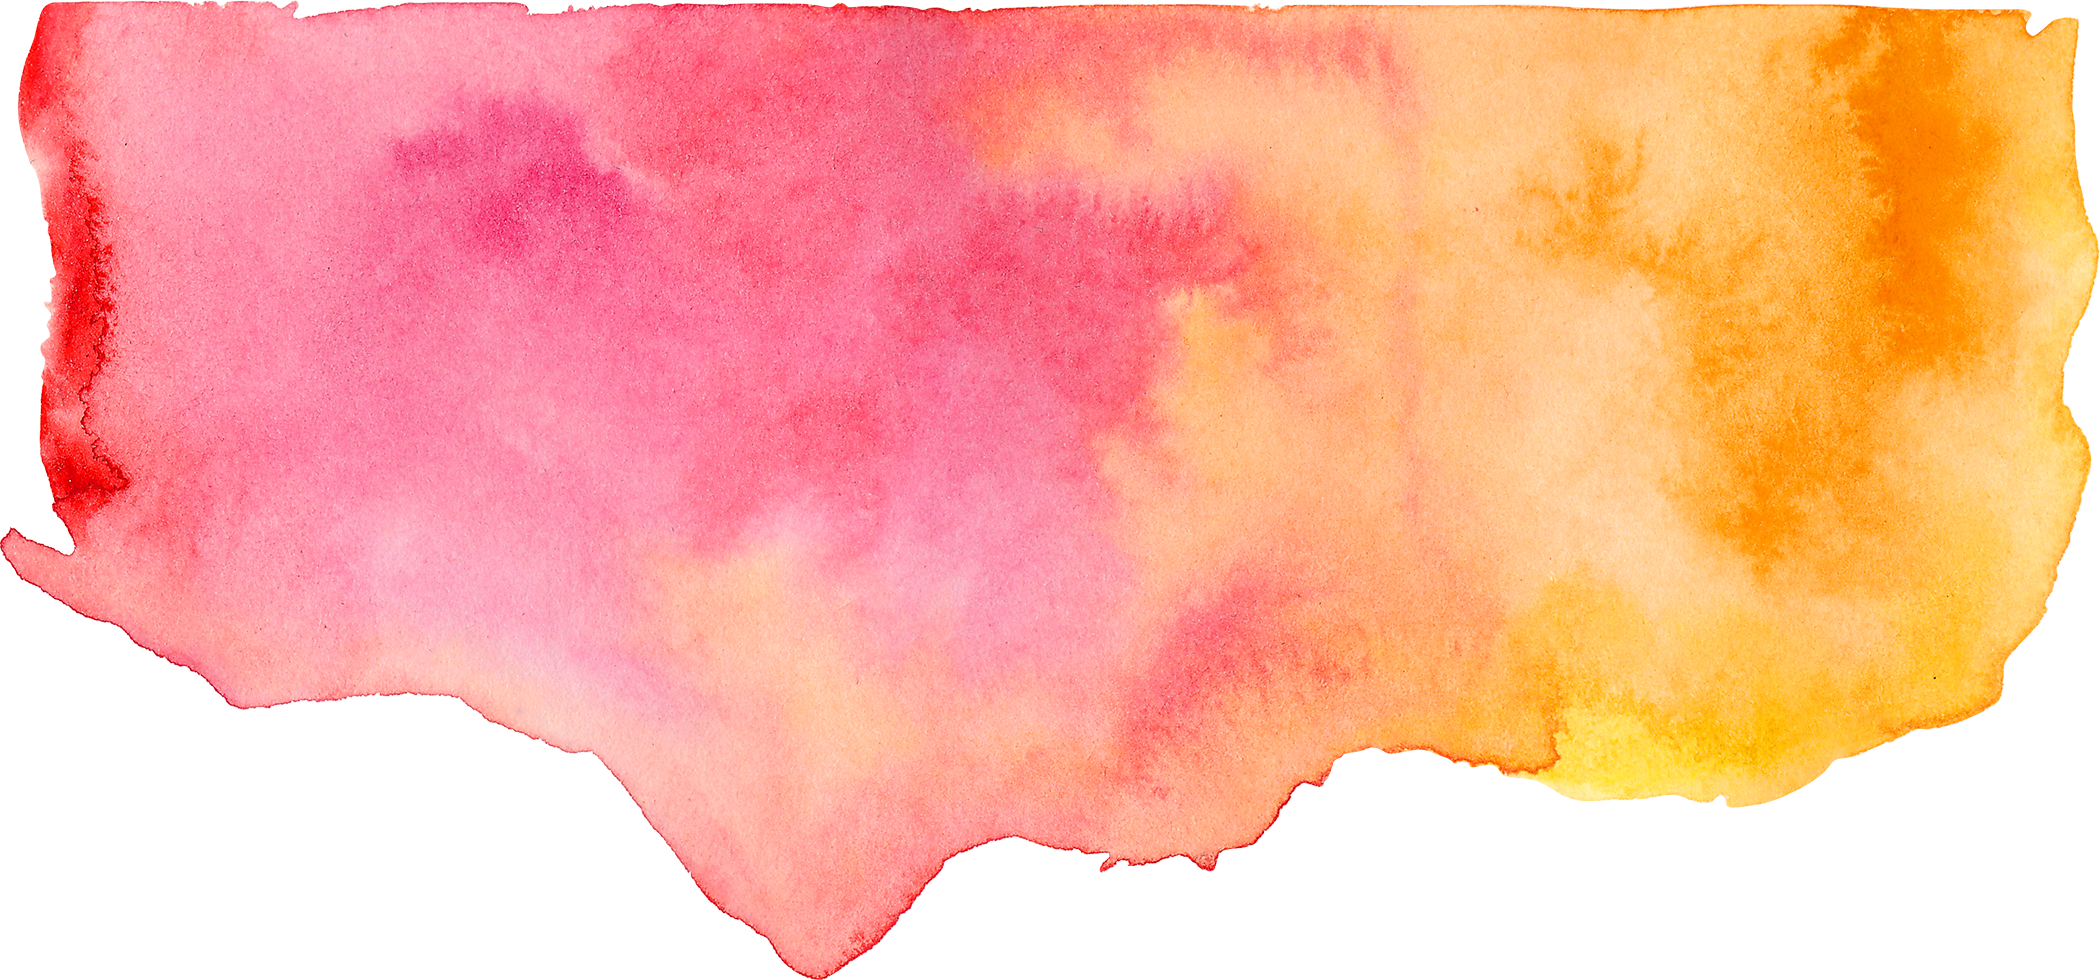 Abstract Watercolor Pink Background